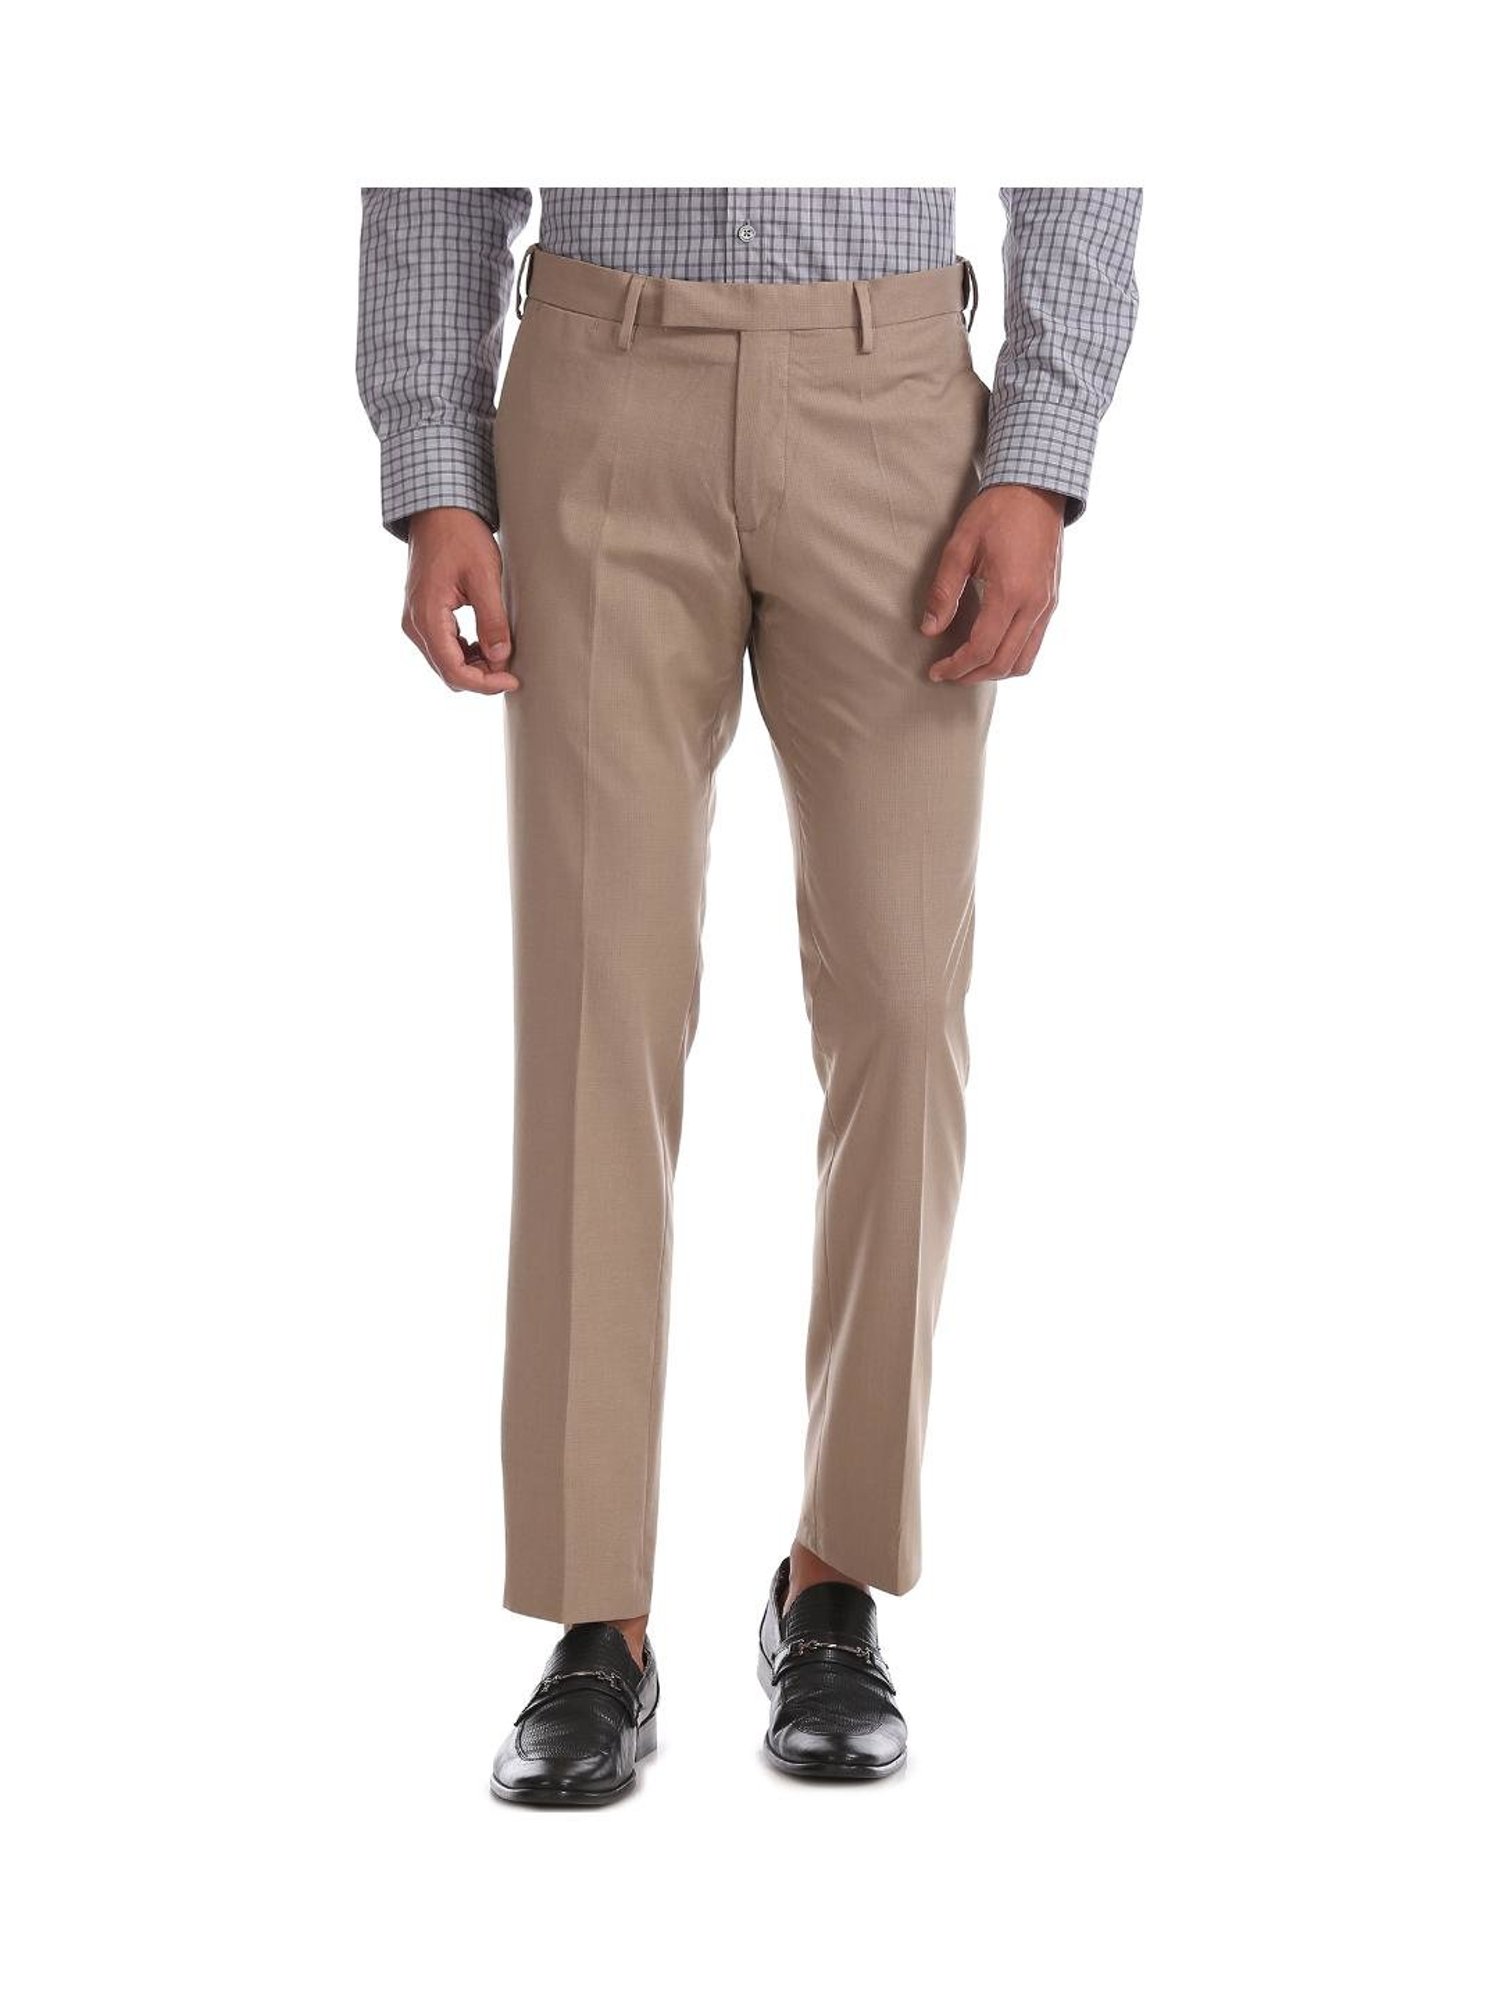 US Polo Assn Solid Slim Fit Trousers Navy 28 in Mahabubnagar at best  price by G S Mens World  Justdial